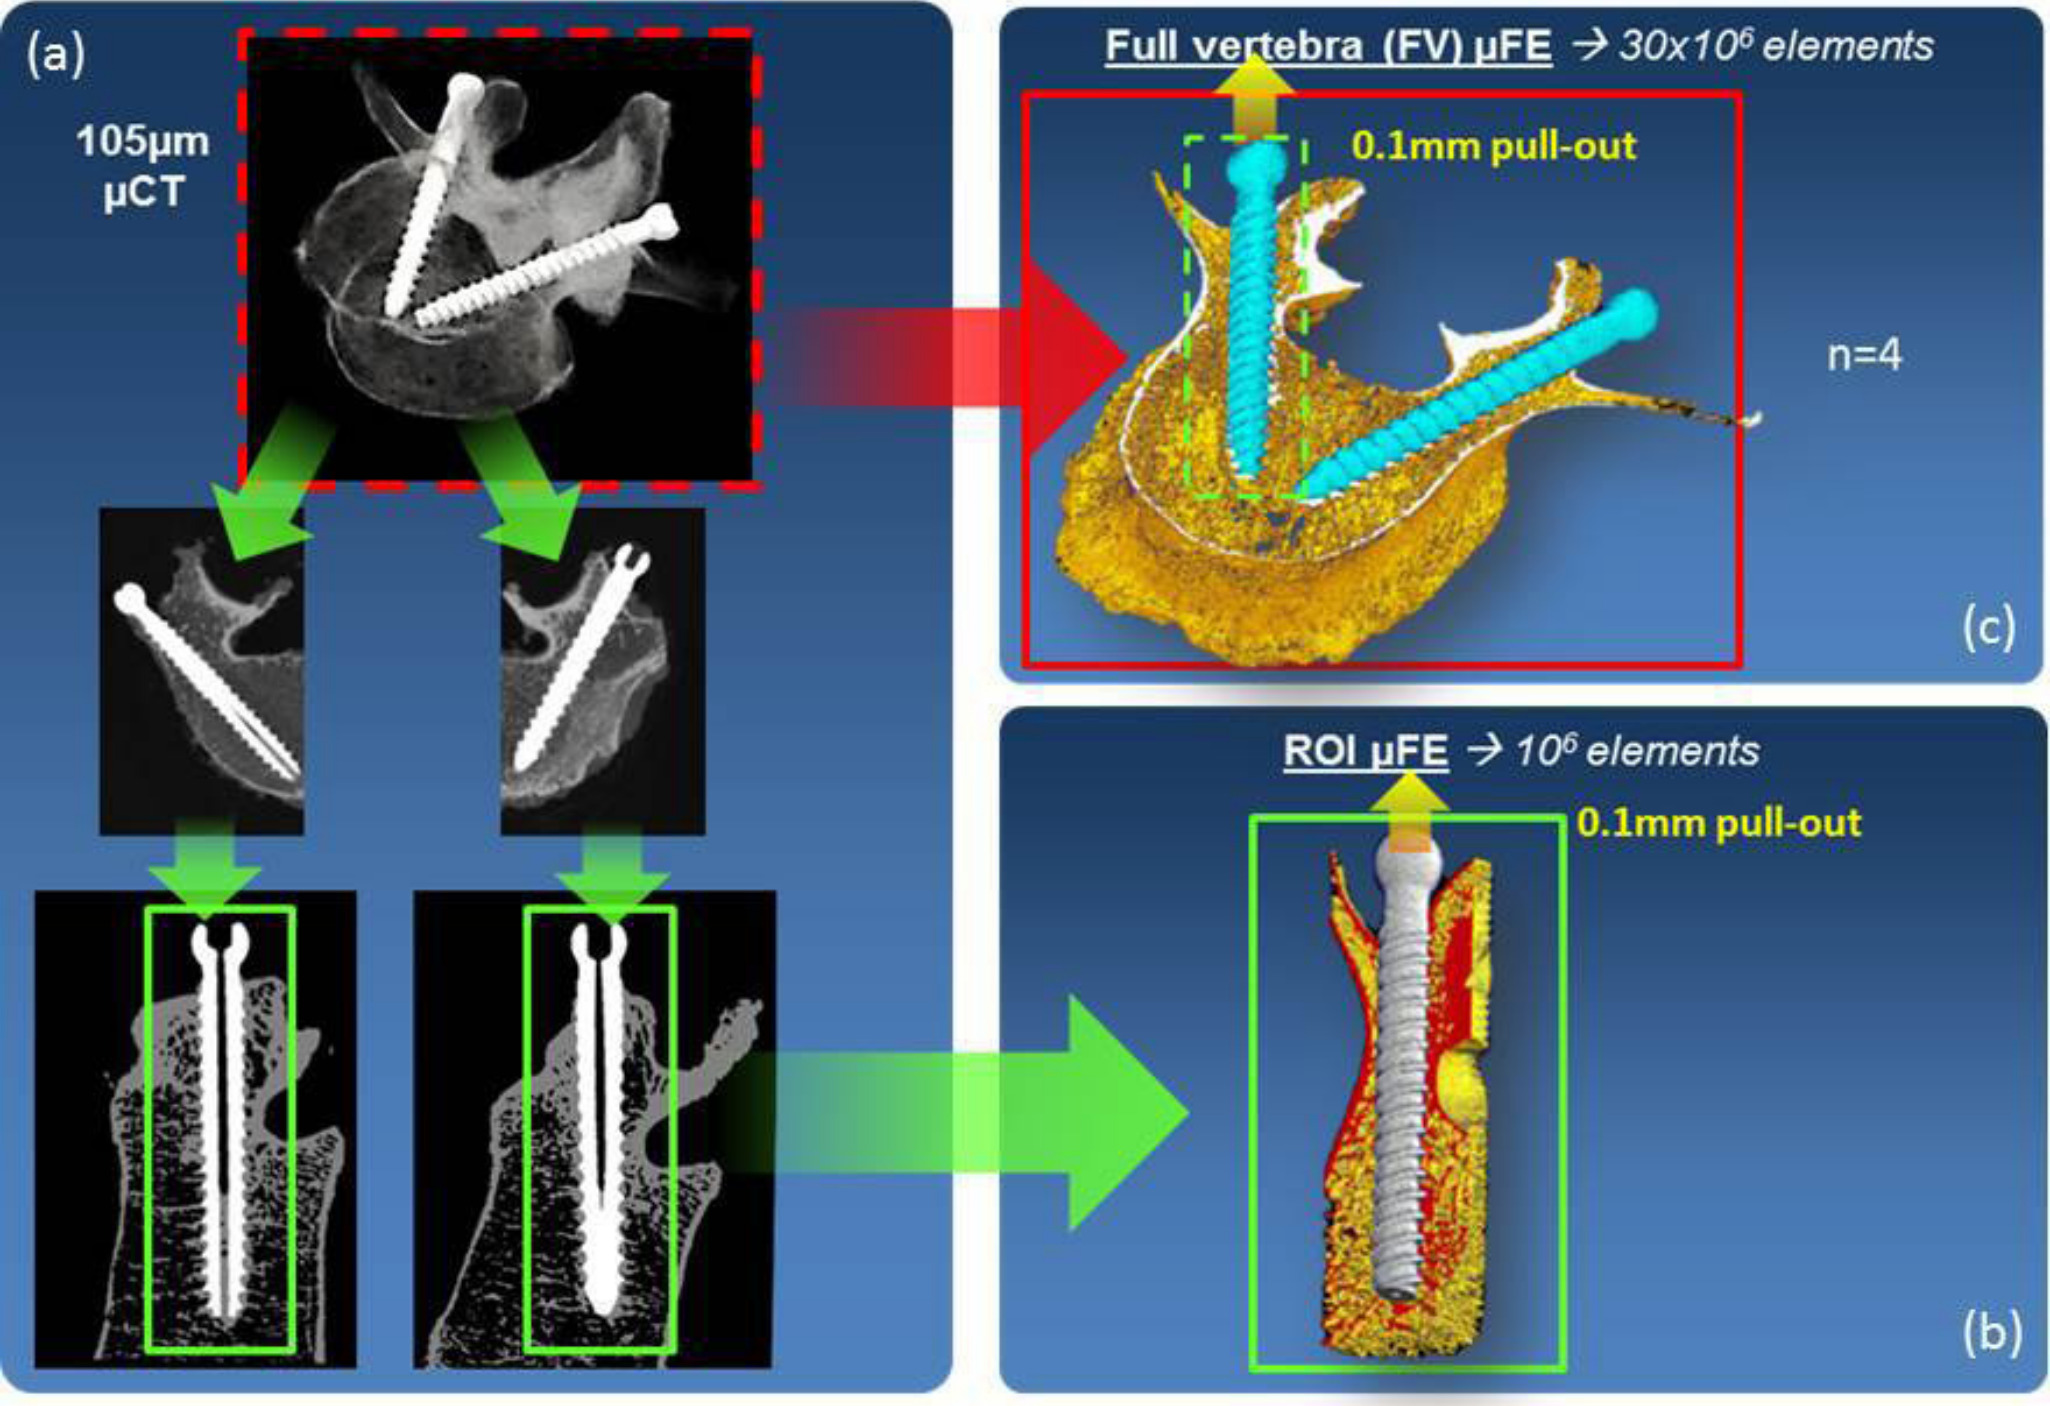 Fig. 1 
            
              a) Cadaveric vertebrae implanted with pedicle screws were scanned at 
              105
              
              µm
               resolution with micro-CT (µCT). These images were segmented to separate bone tissue and implants and then cropped to a final 
              10
              
              mm
              
              radius
               region of interest (ROI) around the screw axis, where apparent bone density bone volume fraction (BV/TV) was calculated. b
              ) These ROI regions were converted to ROI microfinite element (µFE) models, which were then constrained at the bottom bone nodes while the upper nodes at the screw were displaced by 
              0.1
              
              mm
              . 
              c) In a parallel step, the full vertebral body with pedicle screws was also similarly segmented and converted directly to full vertebra (FV) µFE models.
          